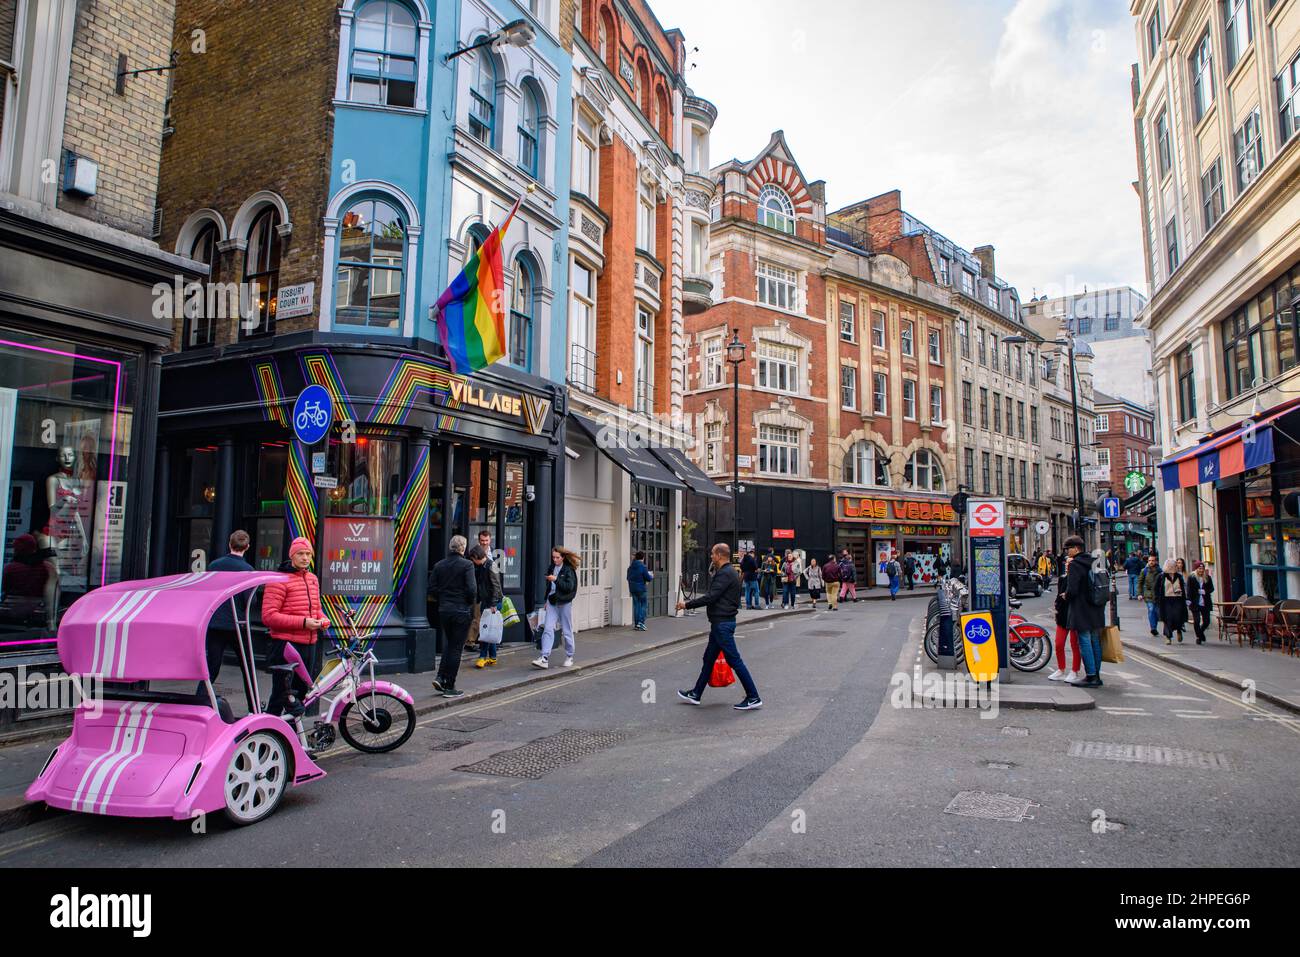 Soho area, the fashionable and entertainment district in London, United Kingdom Stock Photo